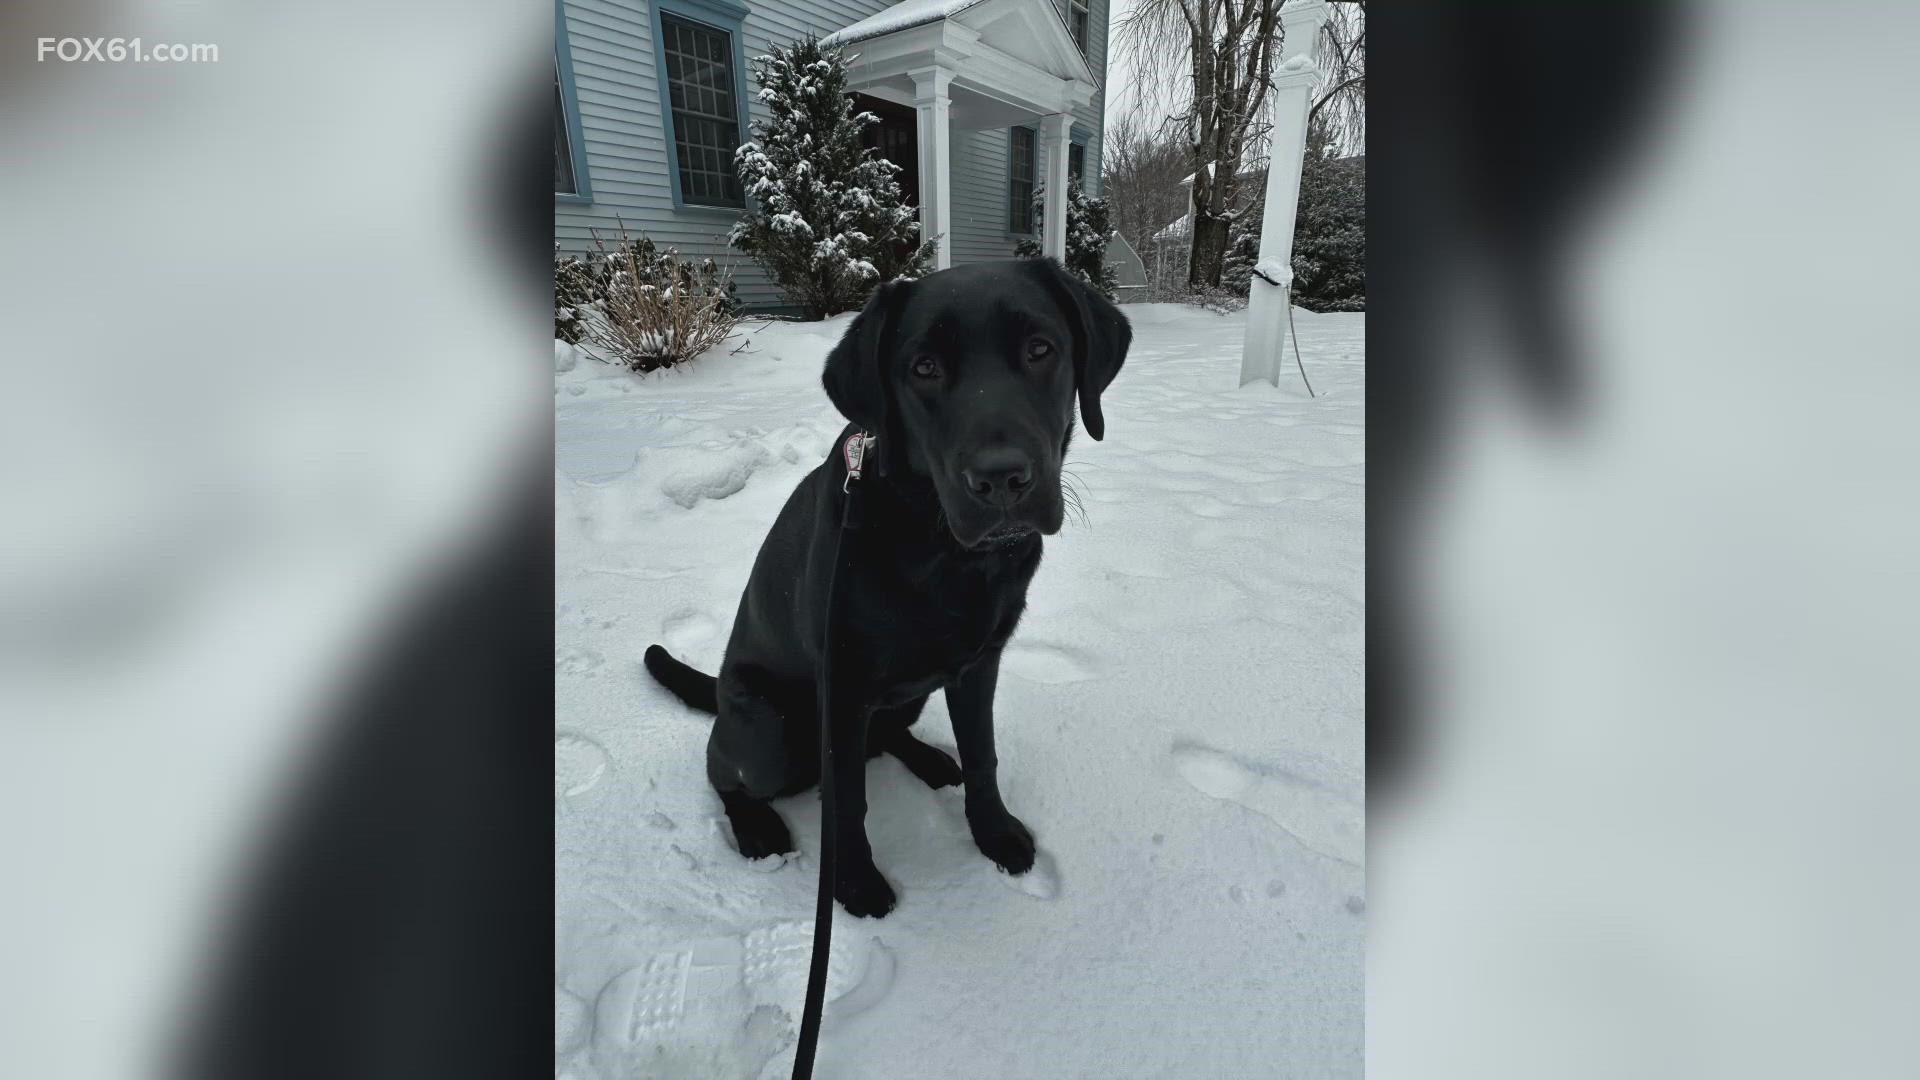 For their first big snow day in Connecticut, NEADS service dogs in training Mystic and Morrissey are exploring the winter weather. FOX61 sponsors these helpful pups.